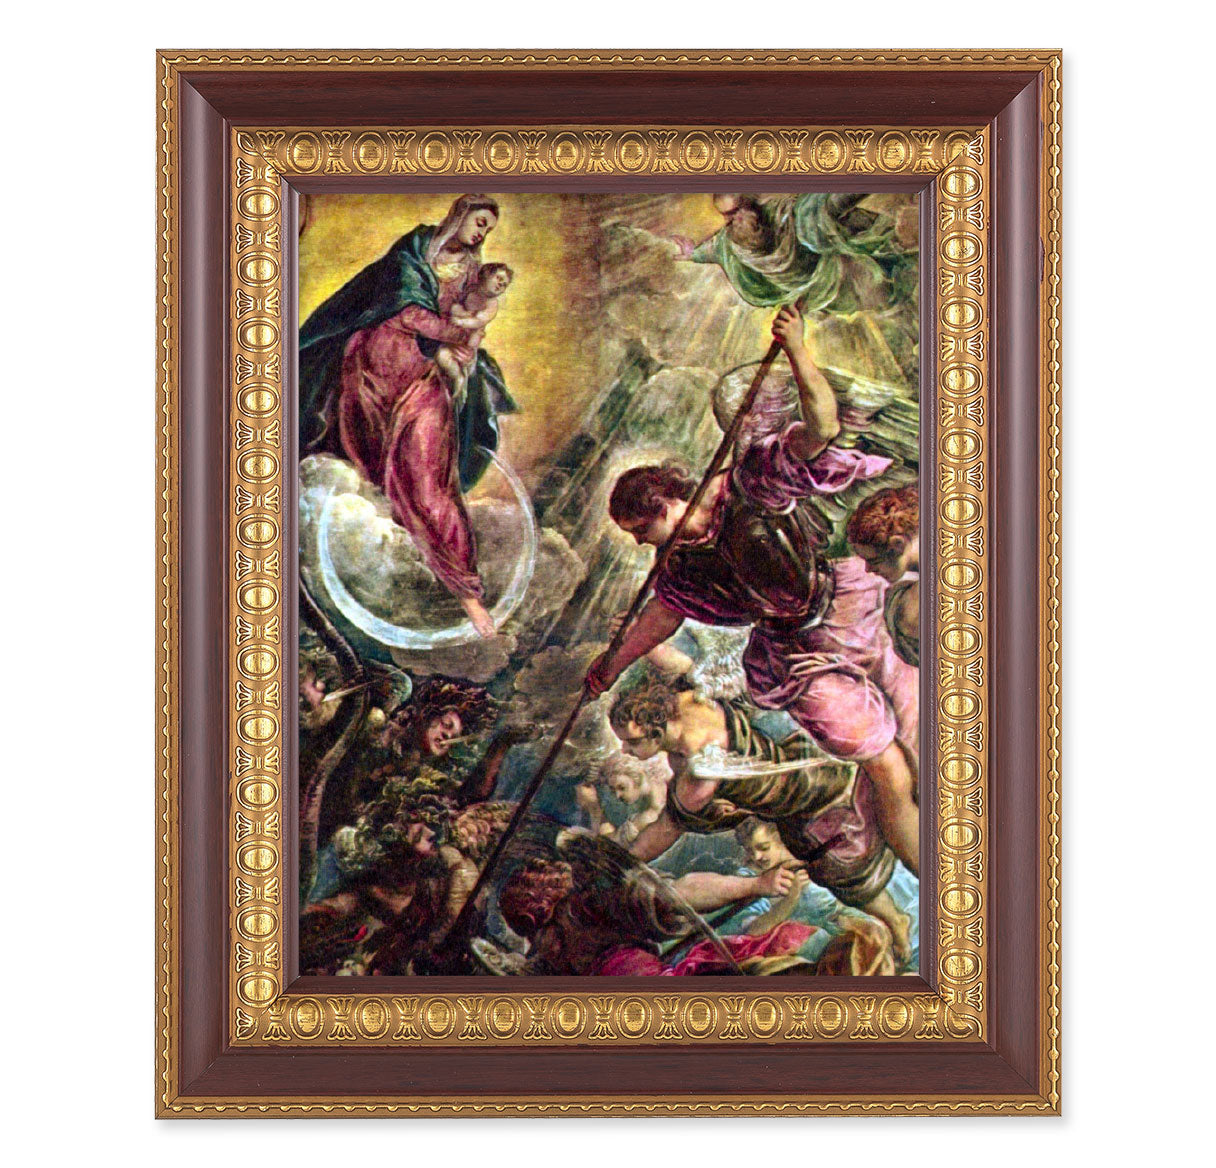 Battle of Archangel St. Michael Picture Framed Wall Art Decor Large, Dark Cherry with Gold Egg and Dart Detailed Frame